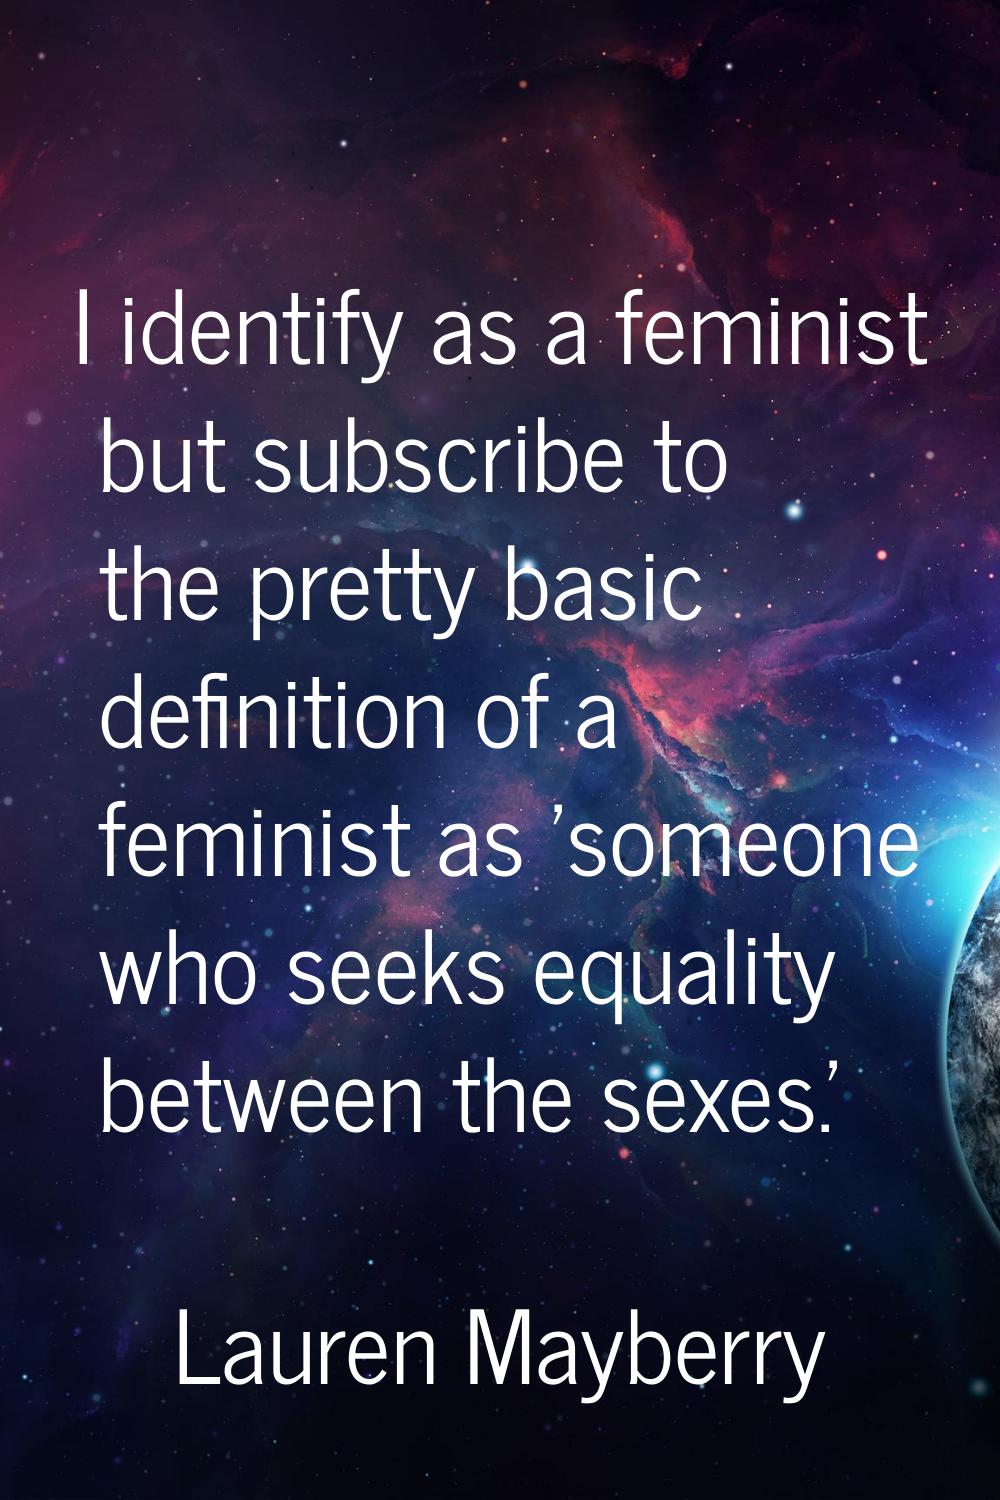 I identify as a feminist but subscribe to the pretty basic definition of a feminist as 'someone who